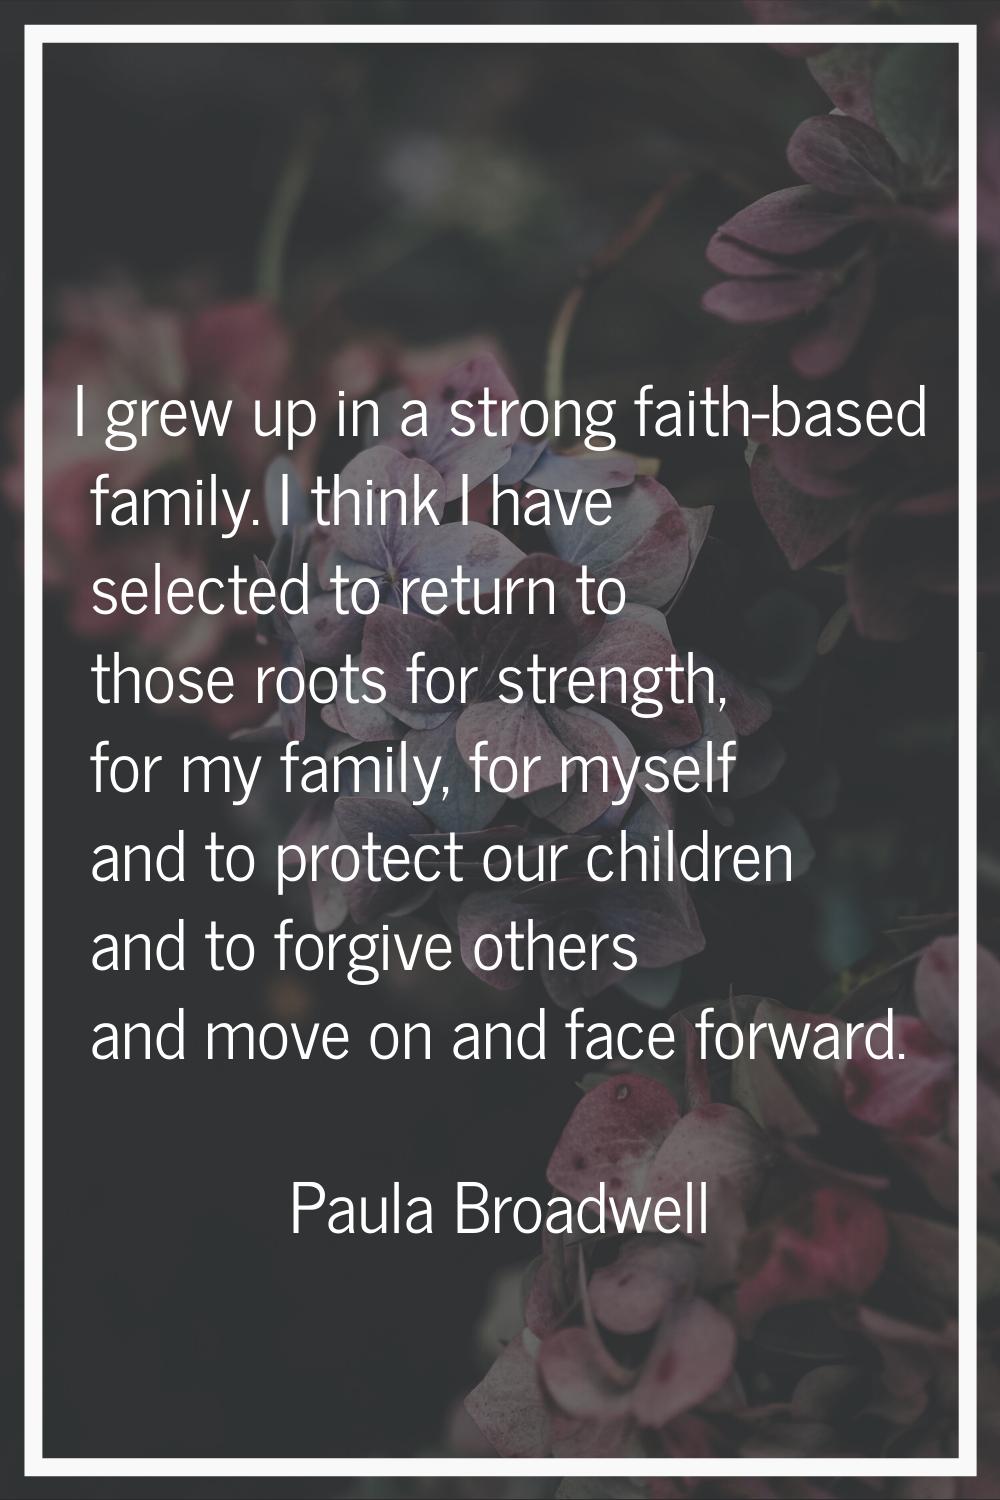 I grew up in a strong faith-based family. I think I have selected to return to those roots for stre